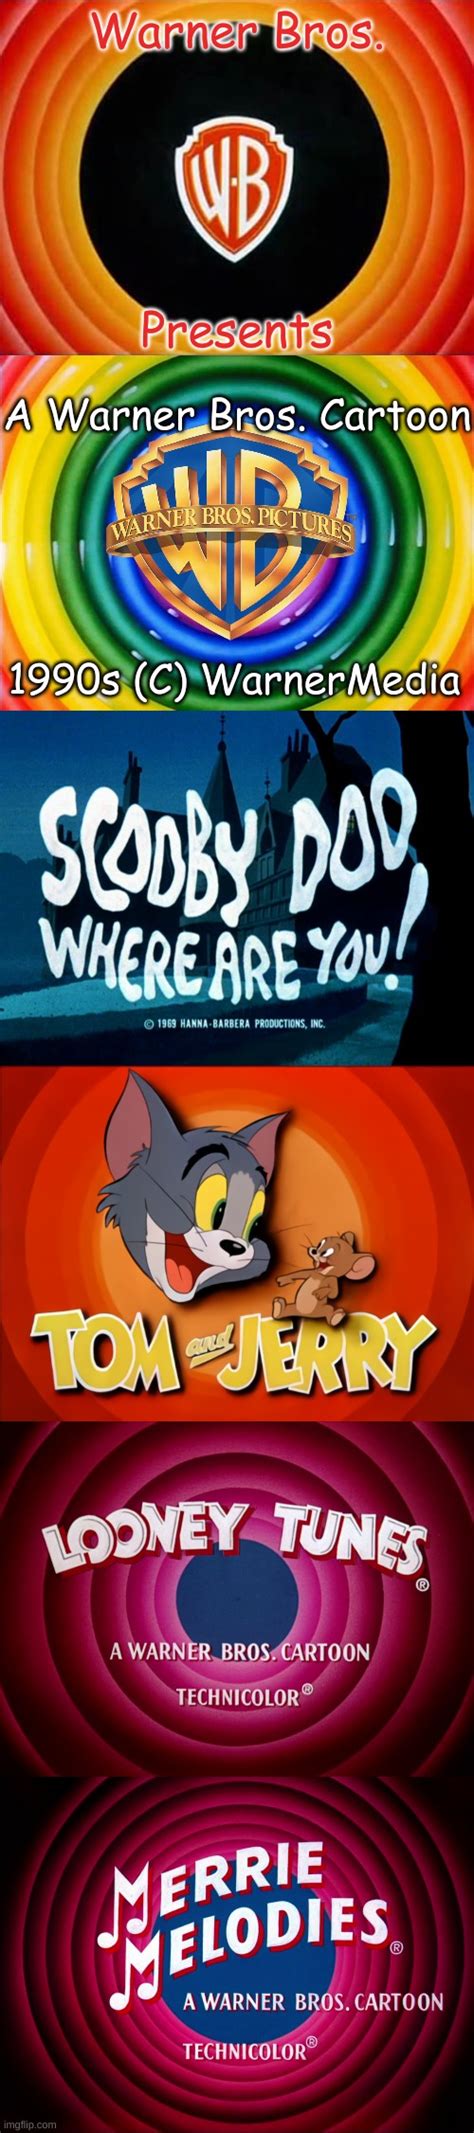 Warner Bros Presents Scooby Doo Where Are You Looney Tunes Tom And